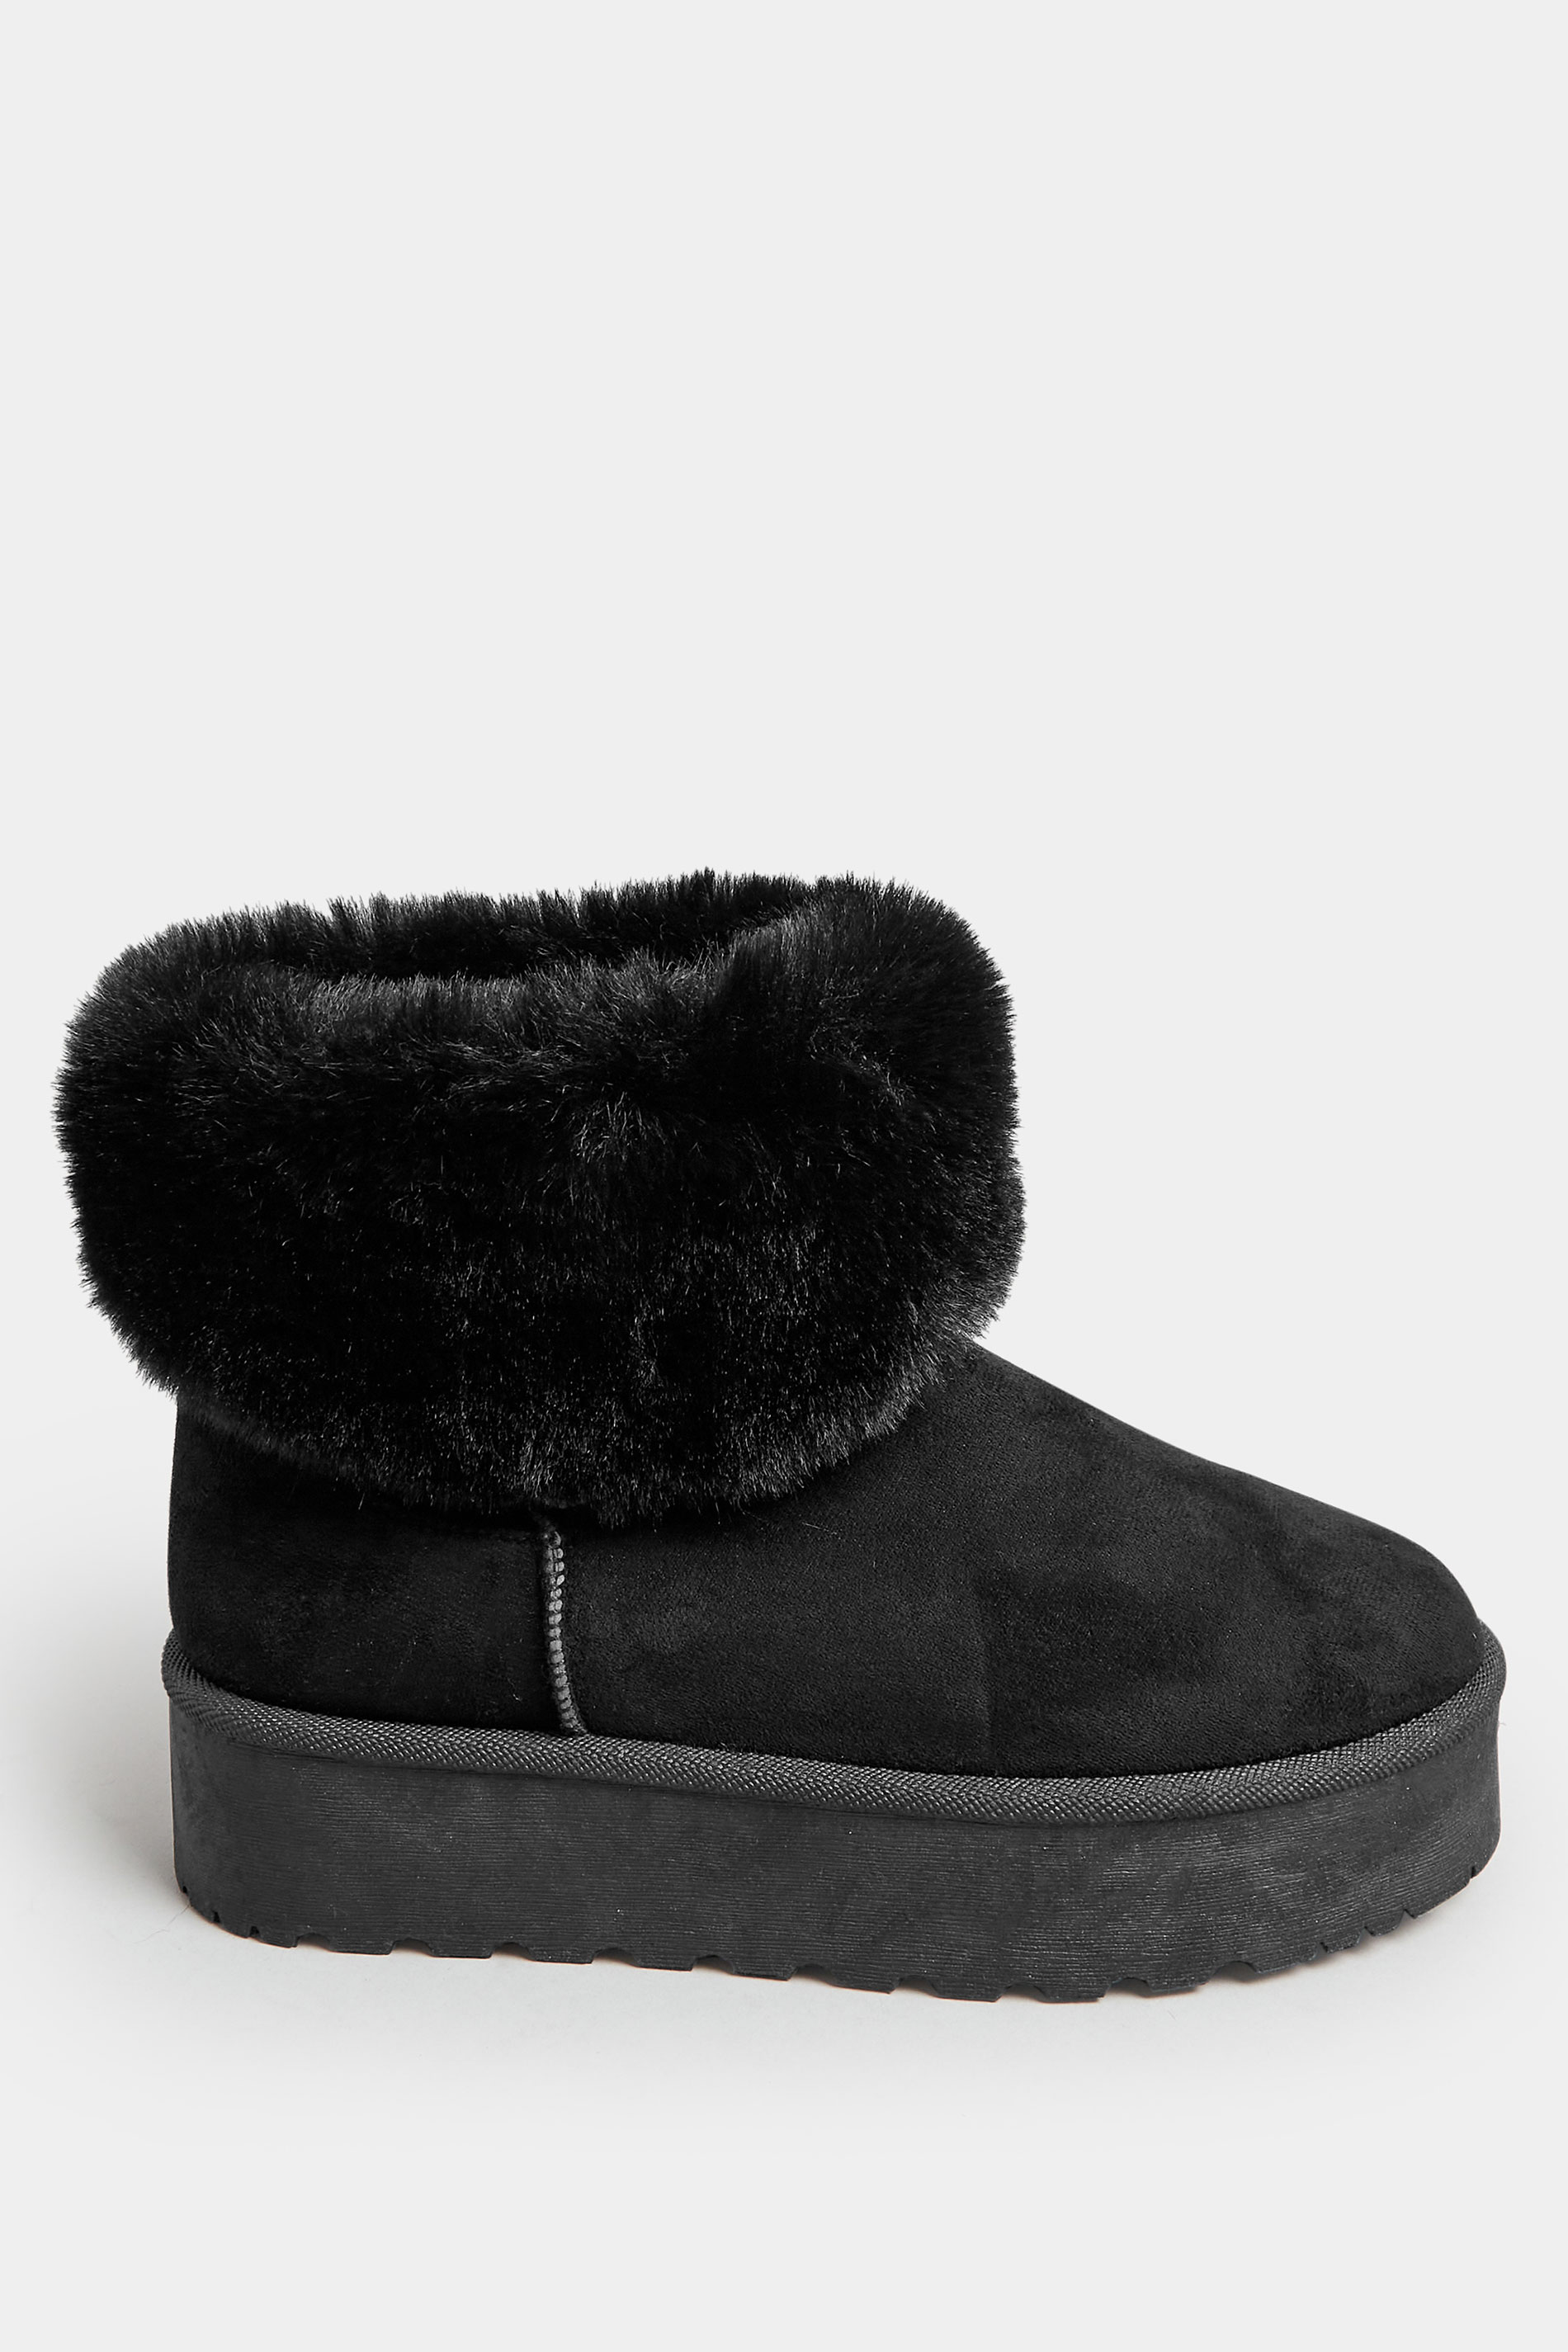 Black Platform Faux Fur Collared Boot in Wide E Fit | Yours Clothing 3